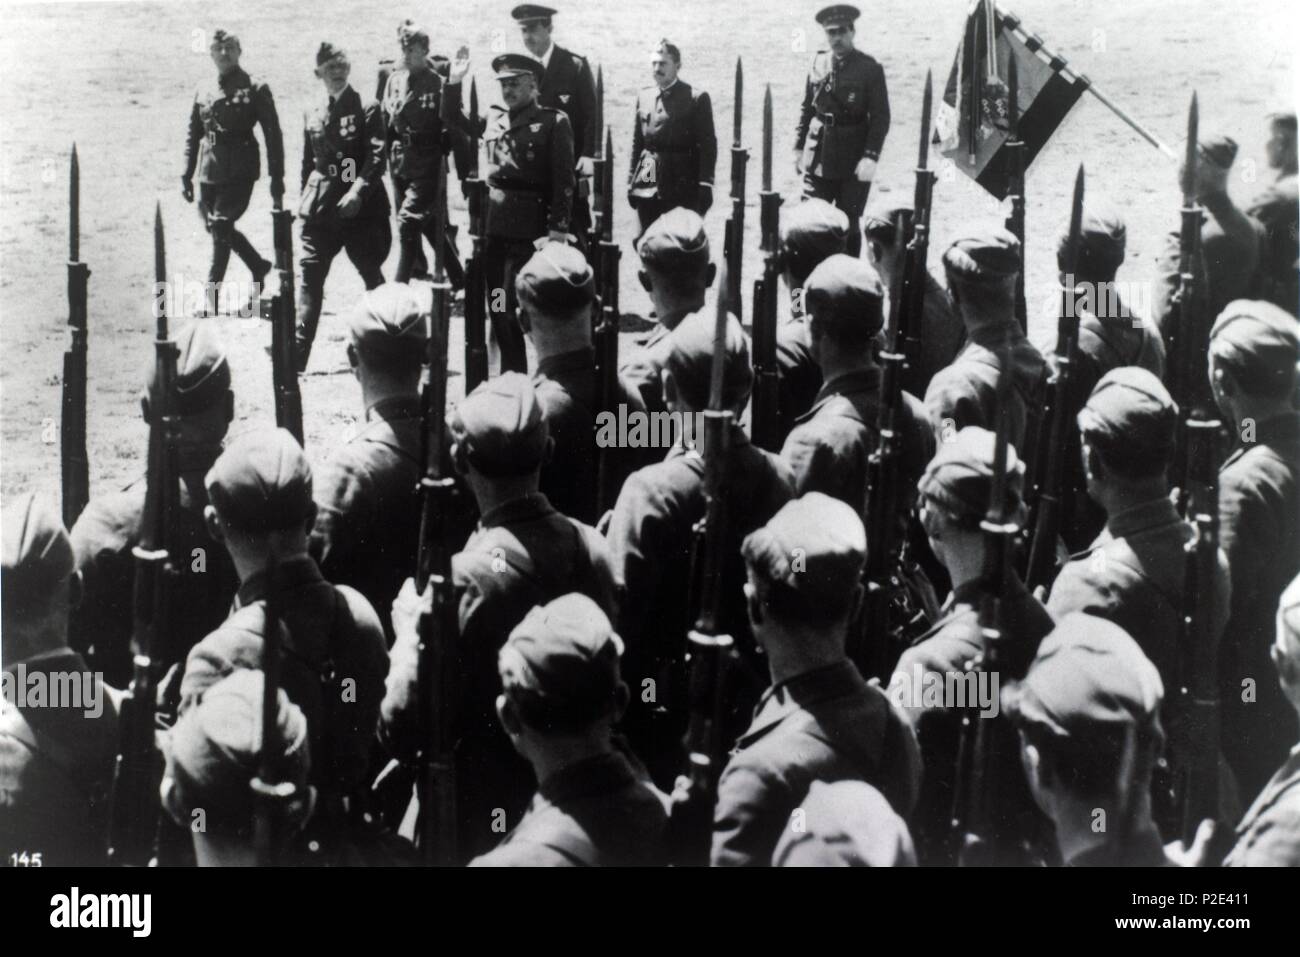 Condor Legion. Accompained by the Legion's Commander, Generalmajor Freiherr Richthofen, Head of State General Franco instpects the formations of German volunteers at the big farewell parade of the Condor Legion at Leon. 25-May 1939. Stock Photo